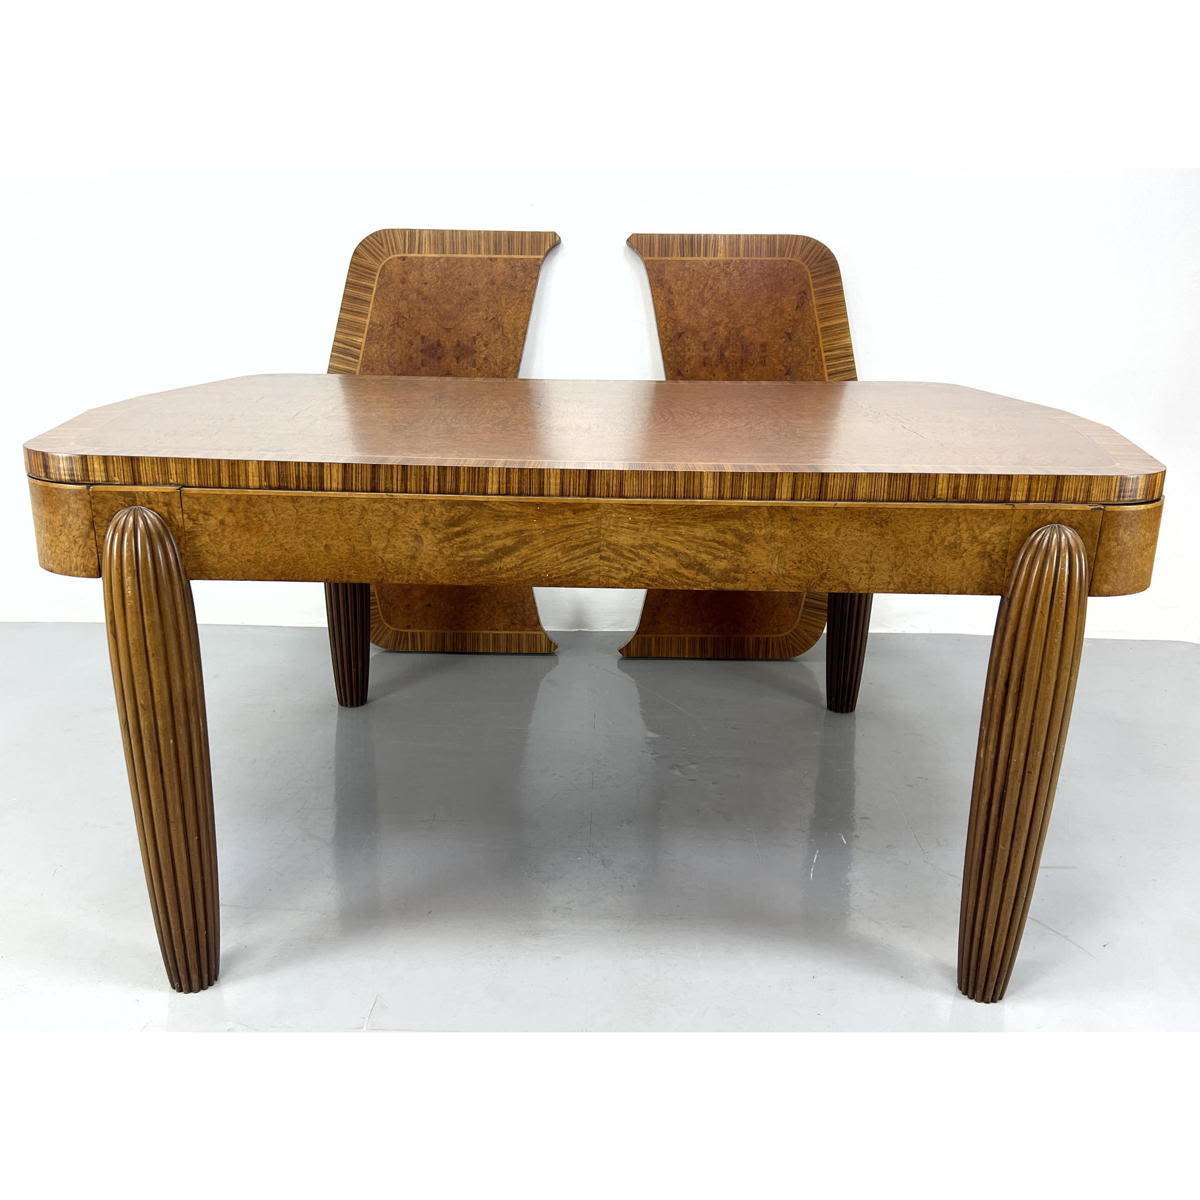 French Art Deco Burl Wood Dining